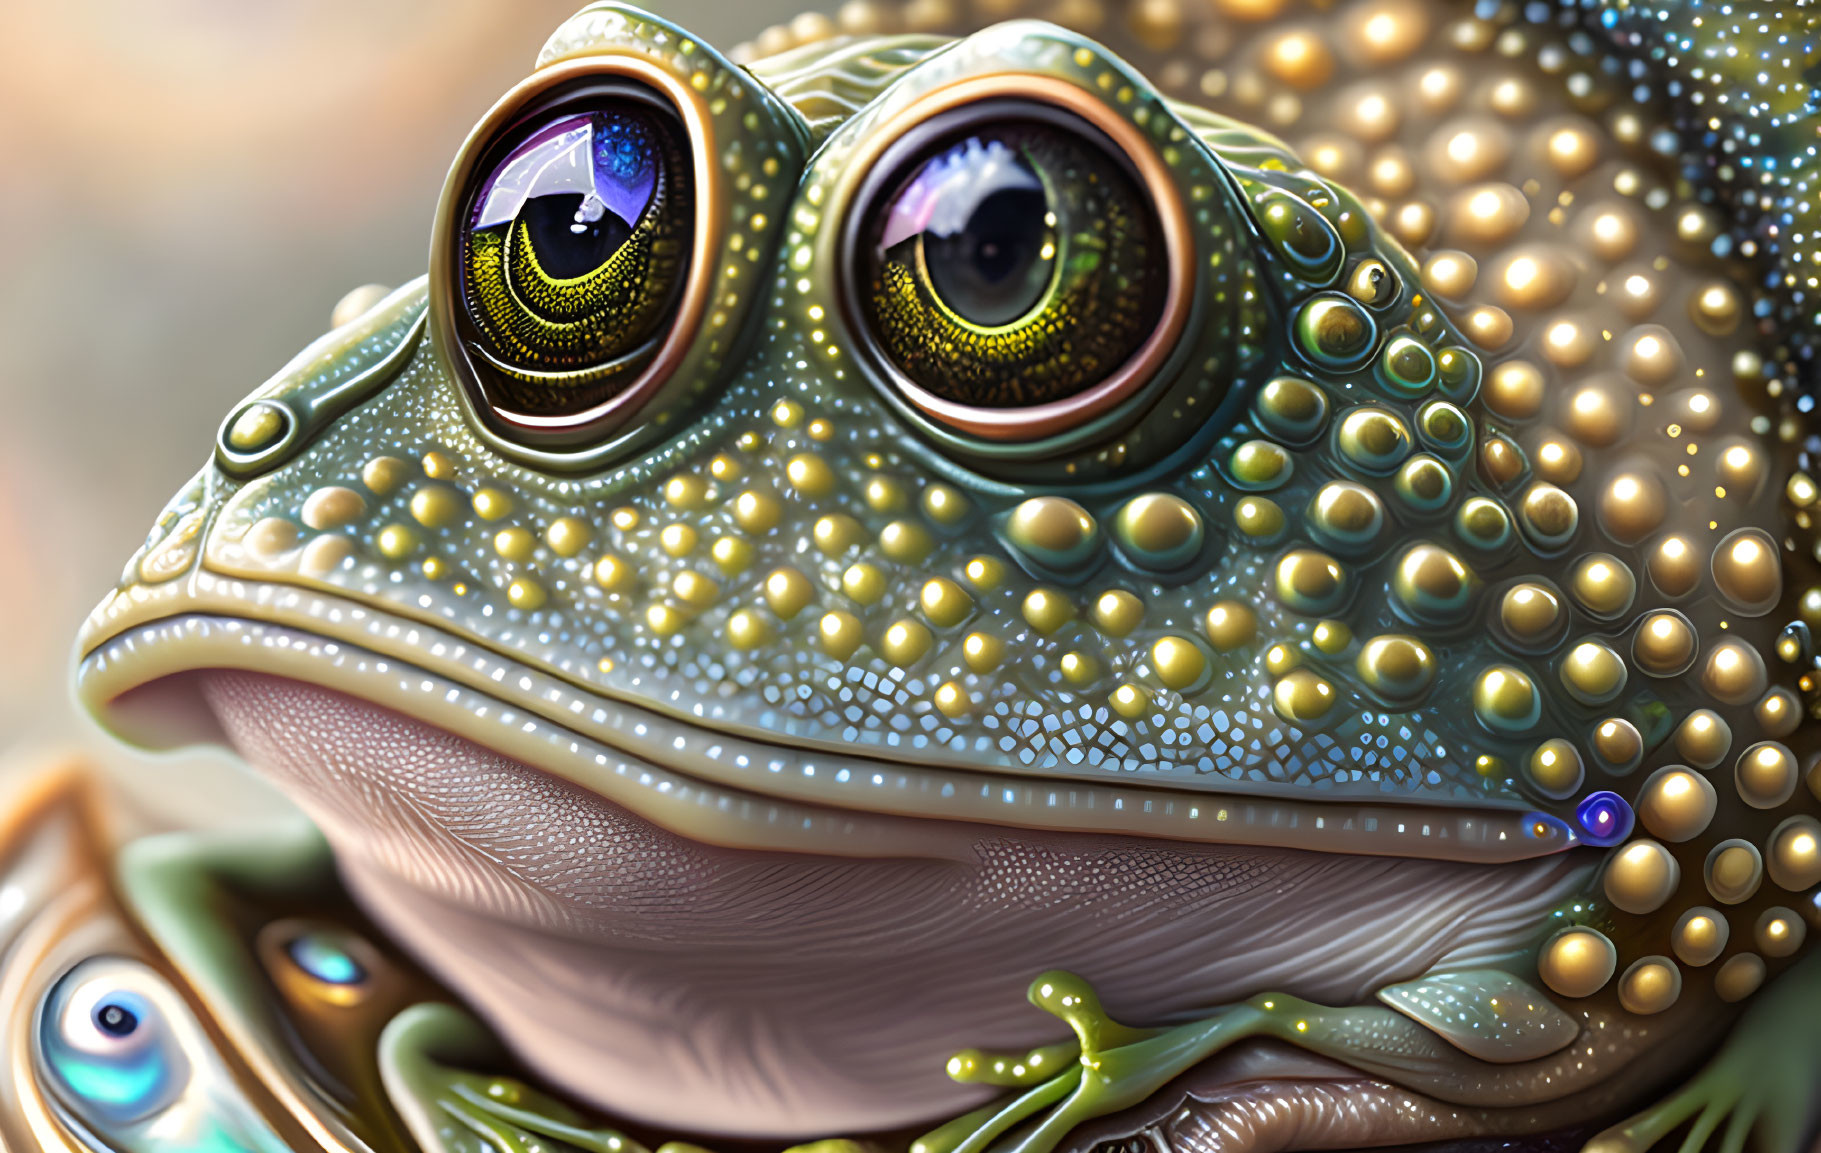 Colorful Textured Frog with Detailed Eyes and Shiny Skin